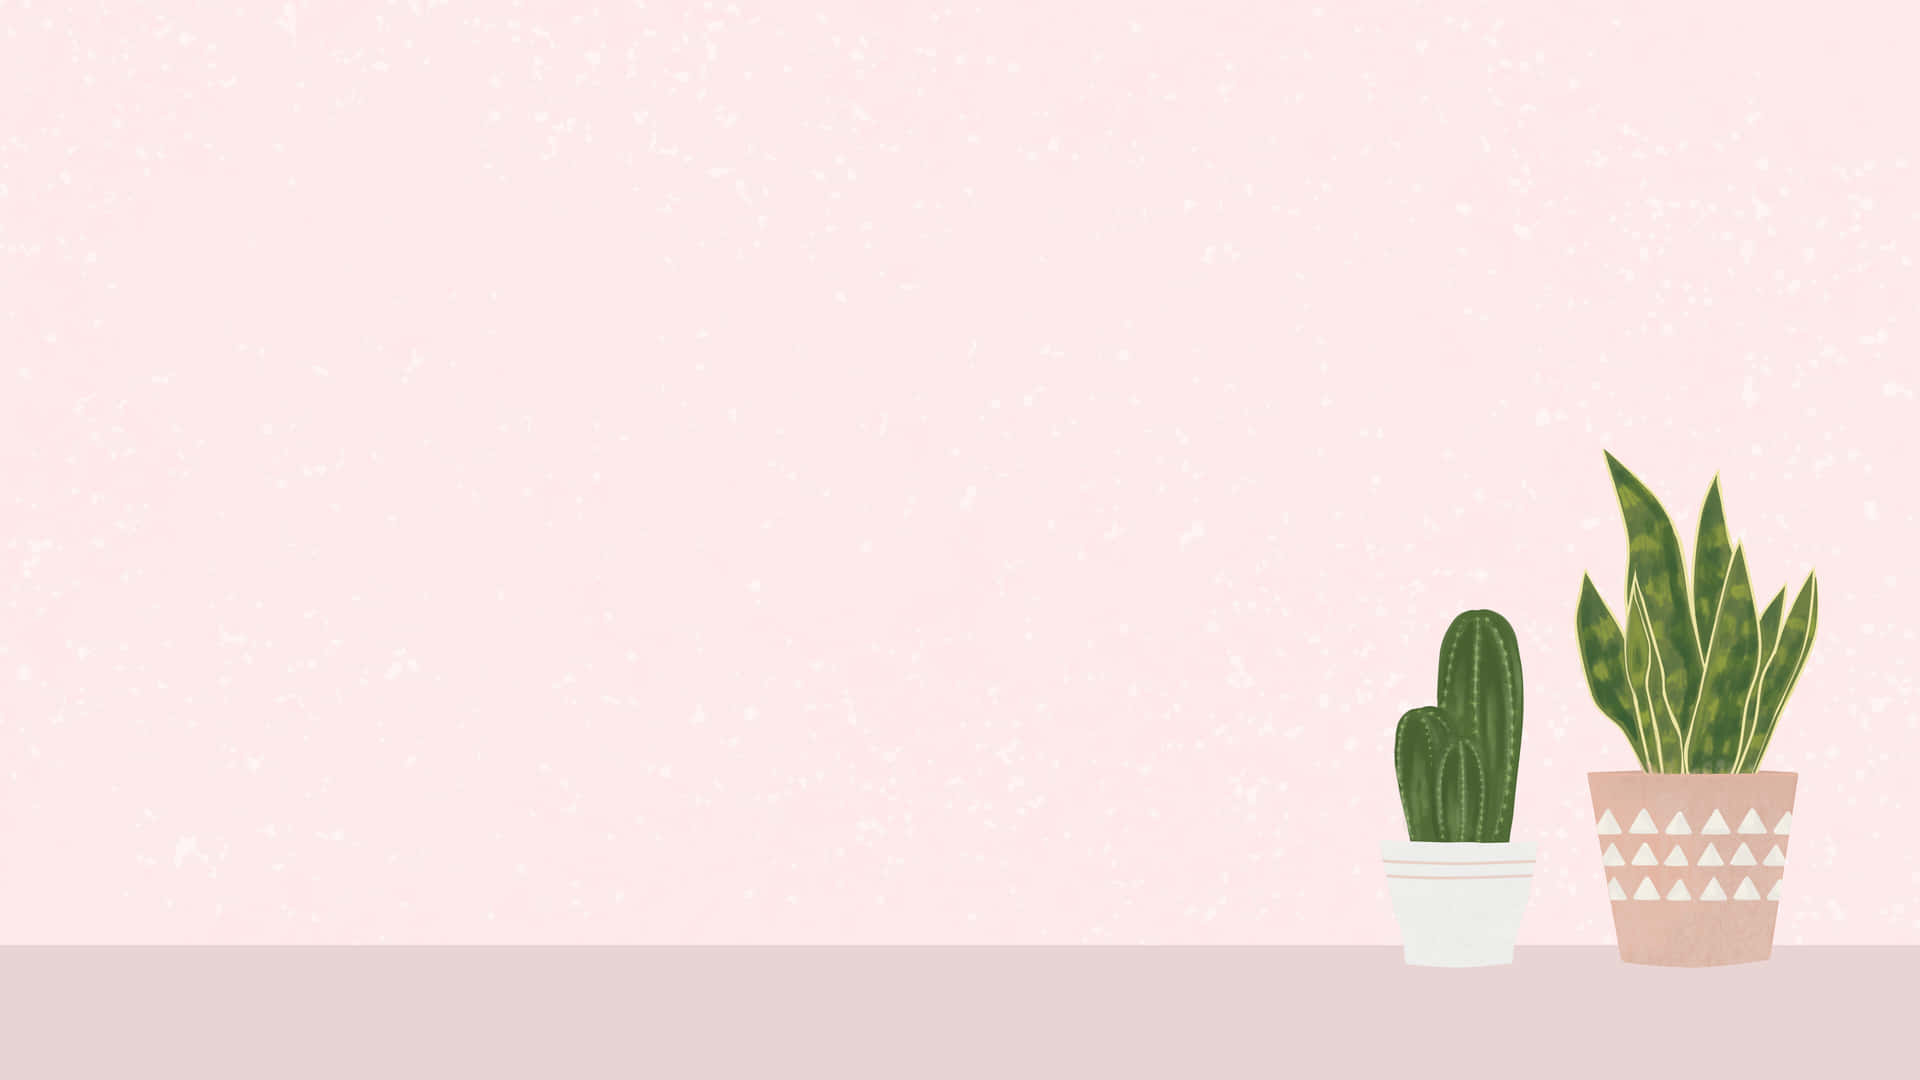 Two potted plants on a pink background - Succulent